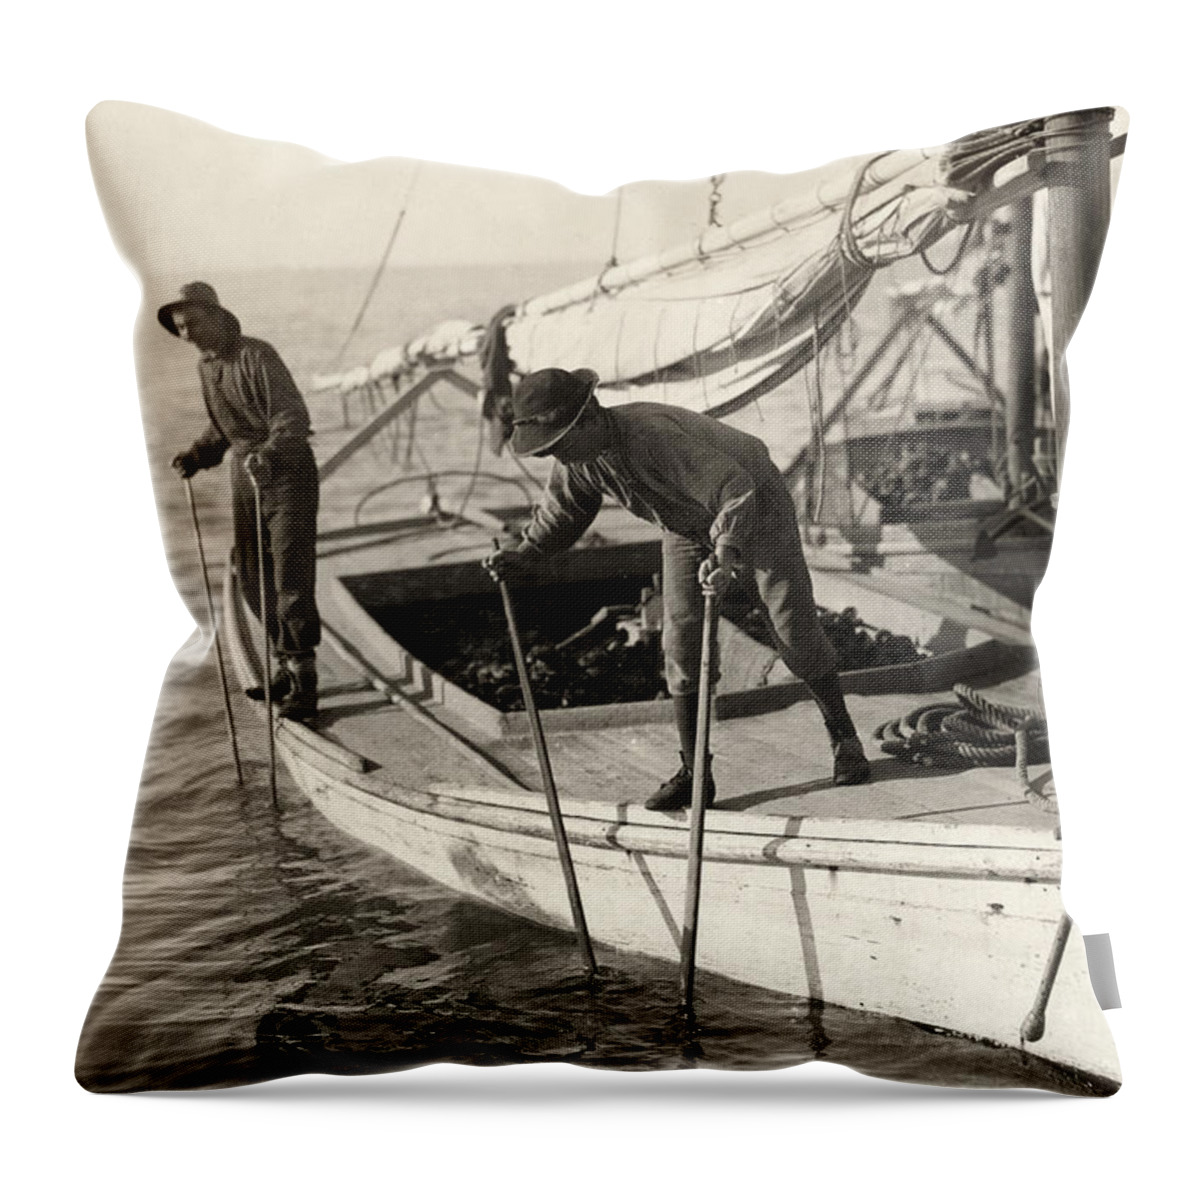 1911 Throw Pillow featuring the photograph Hine Oyster Fishing, 1911 by Granger